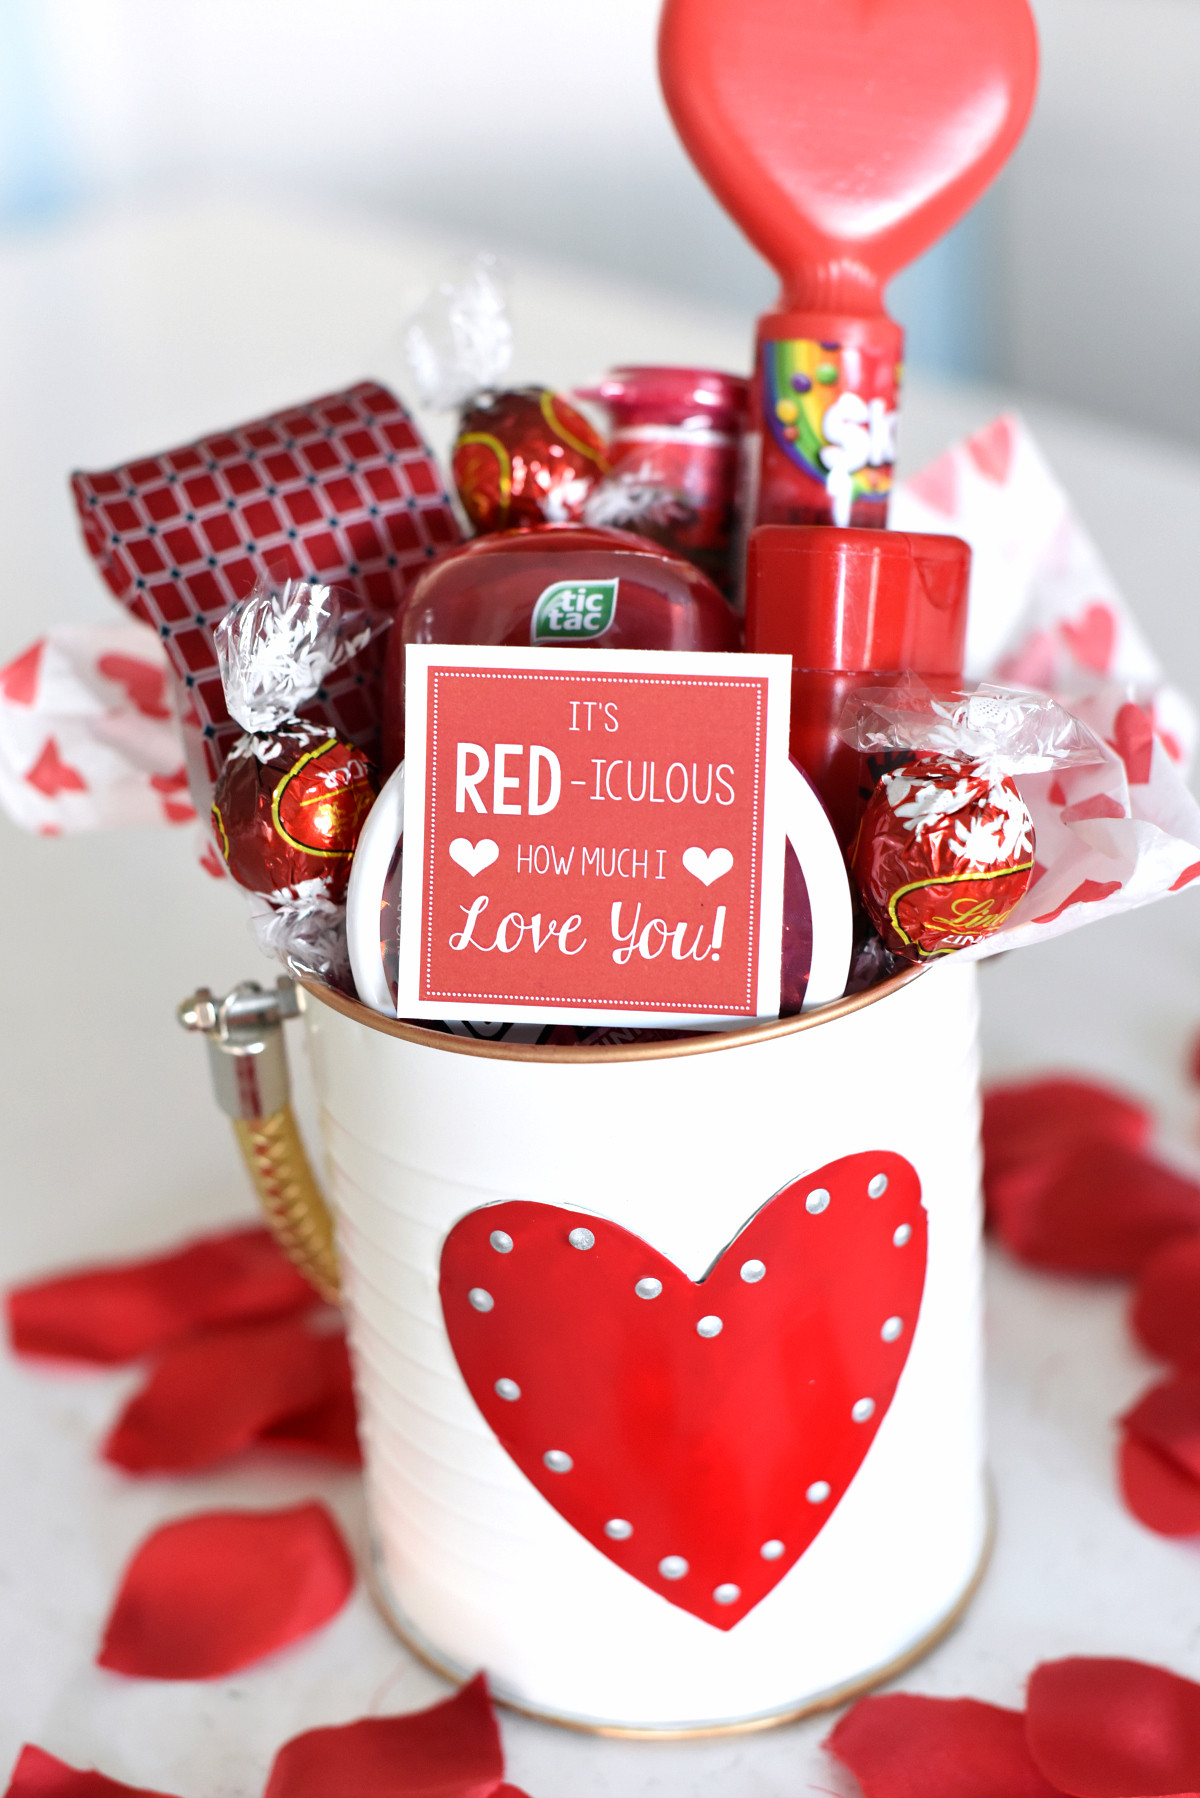 Valentine Day Gift Ideas For Husband
 Cute Valentine s Day Gift Idea RED iculous Basket